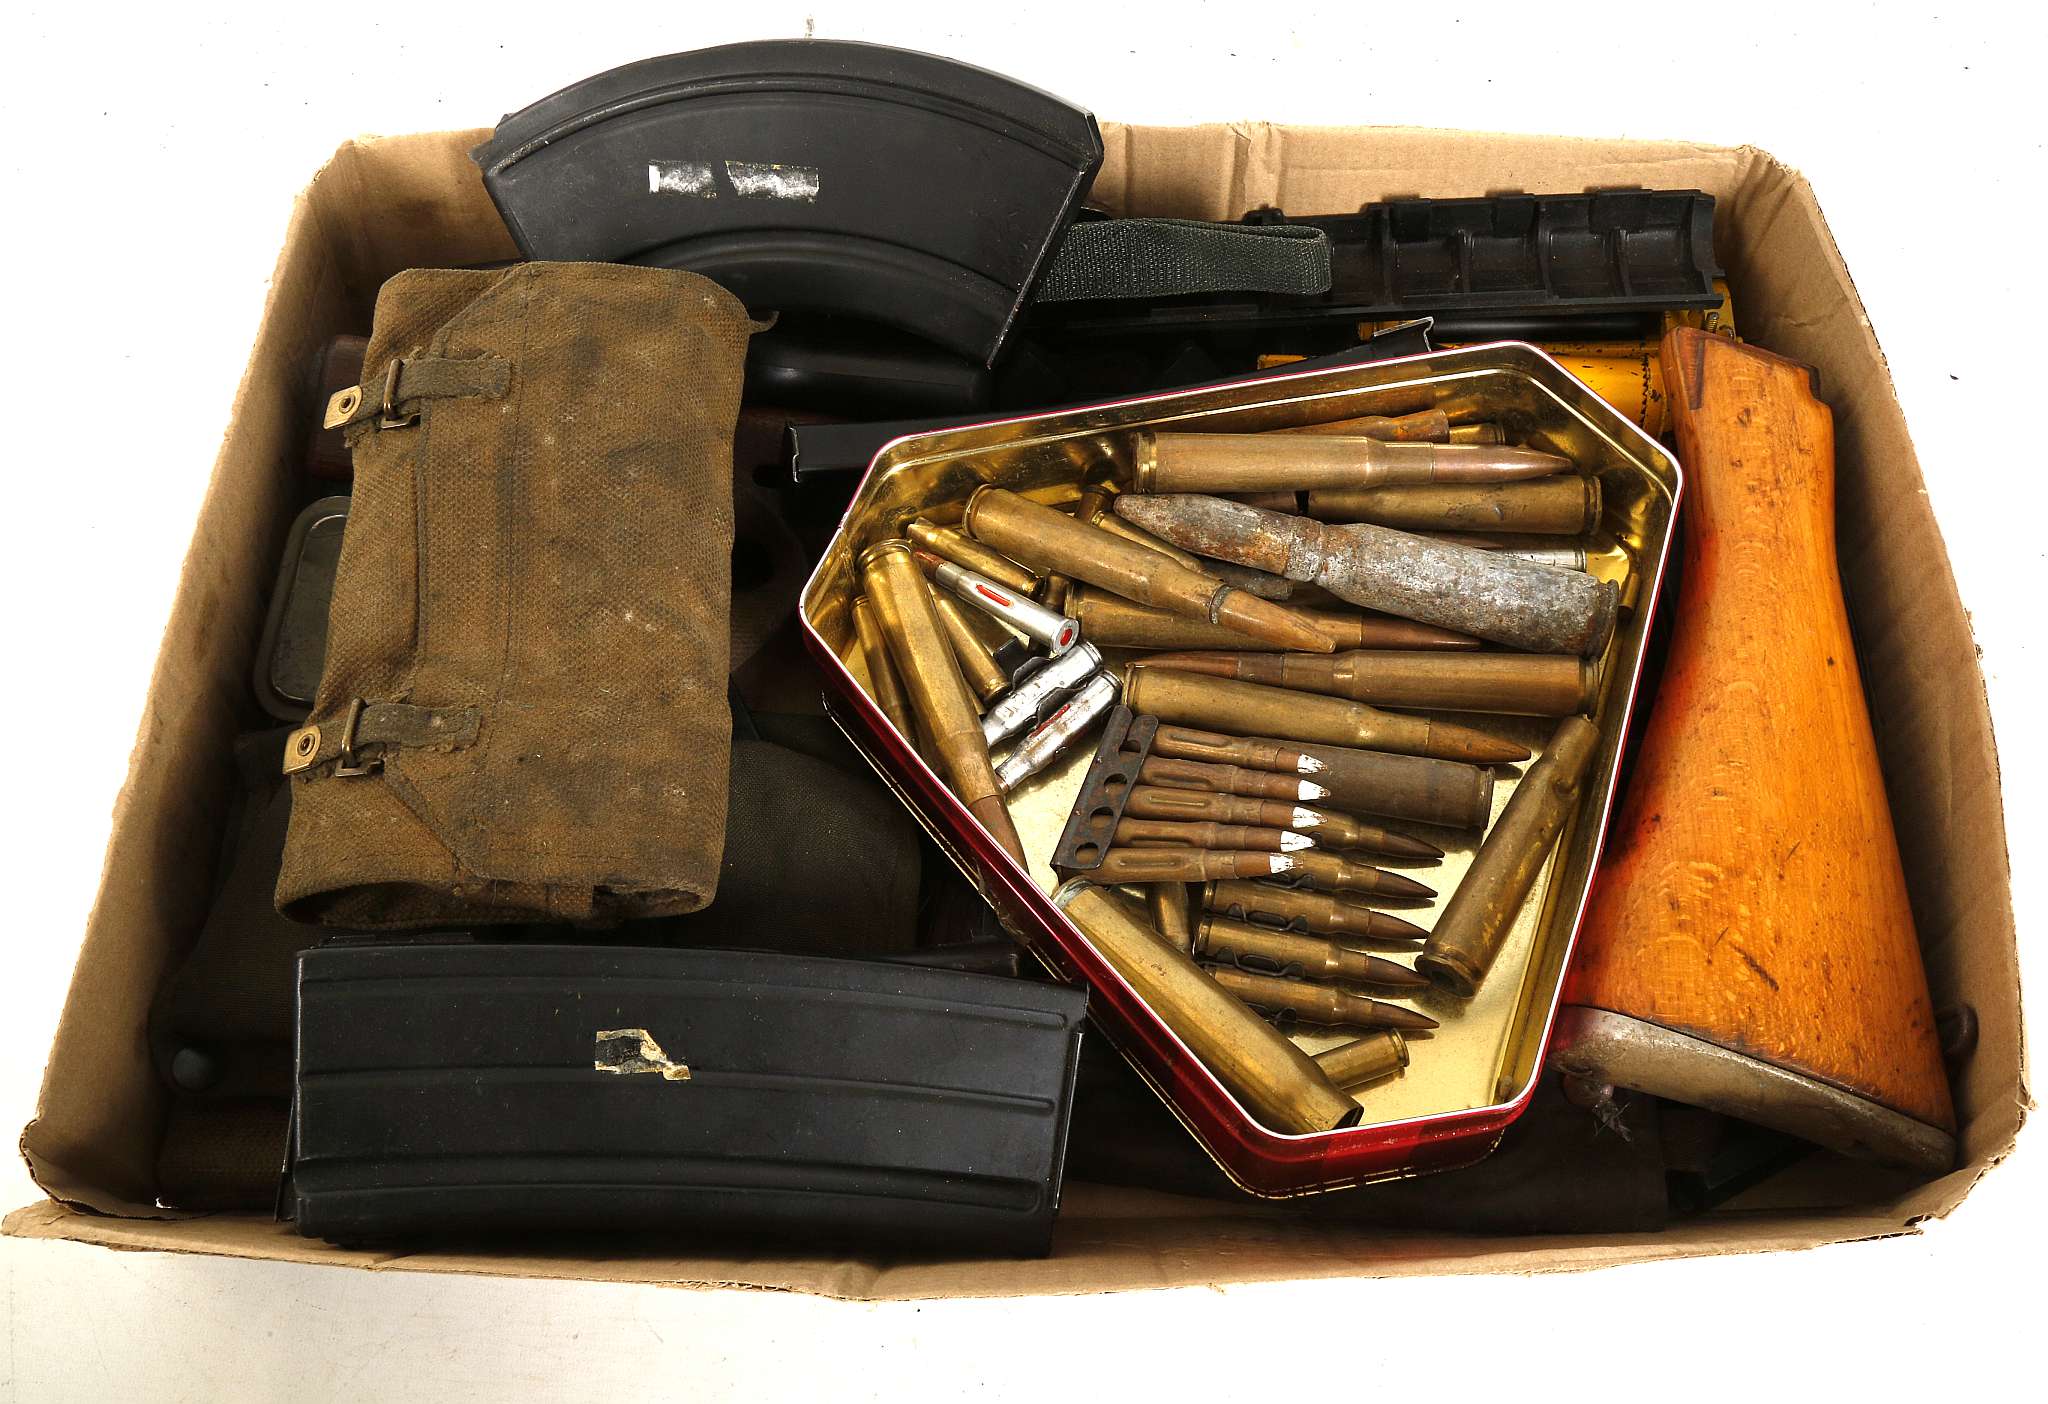 A COLLECTION OF RIFLE AND MACHINE GUN MAGAZINES, cleaning kits for personal weapons and spent